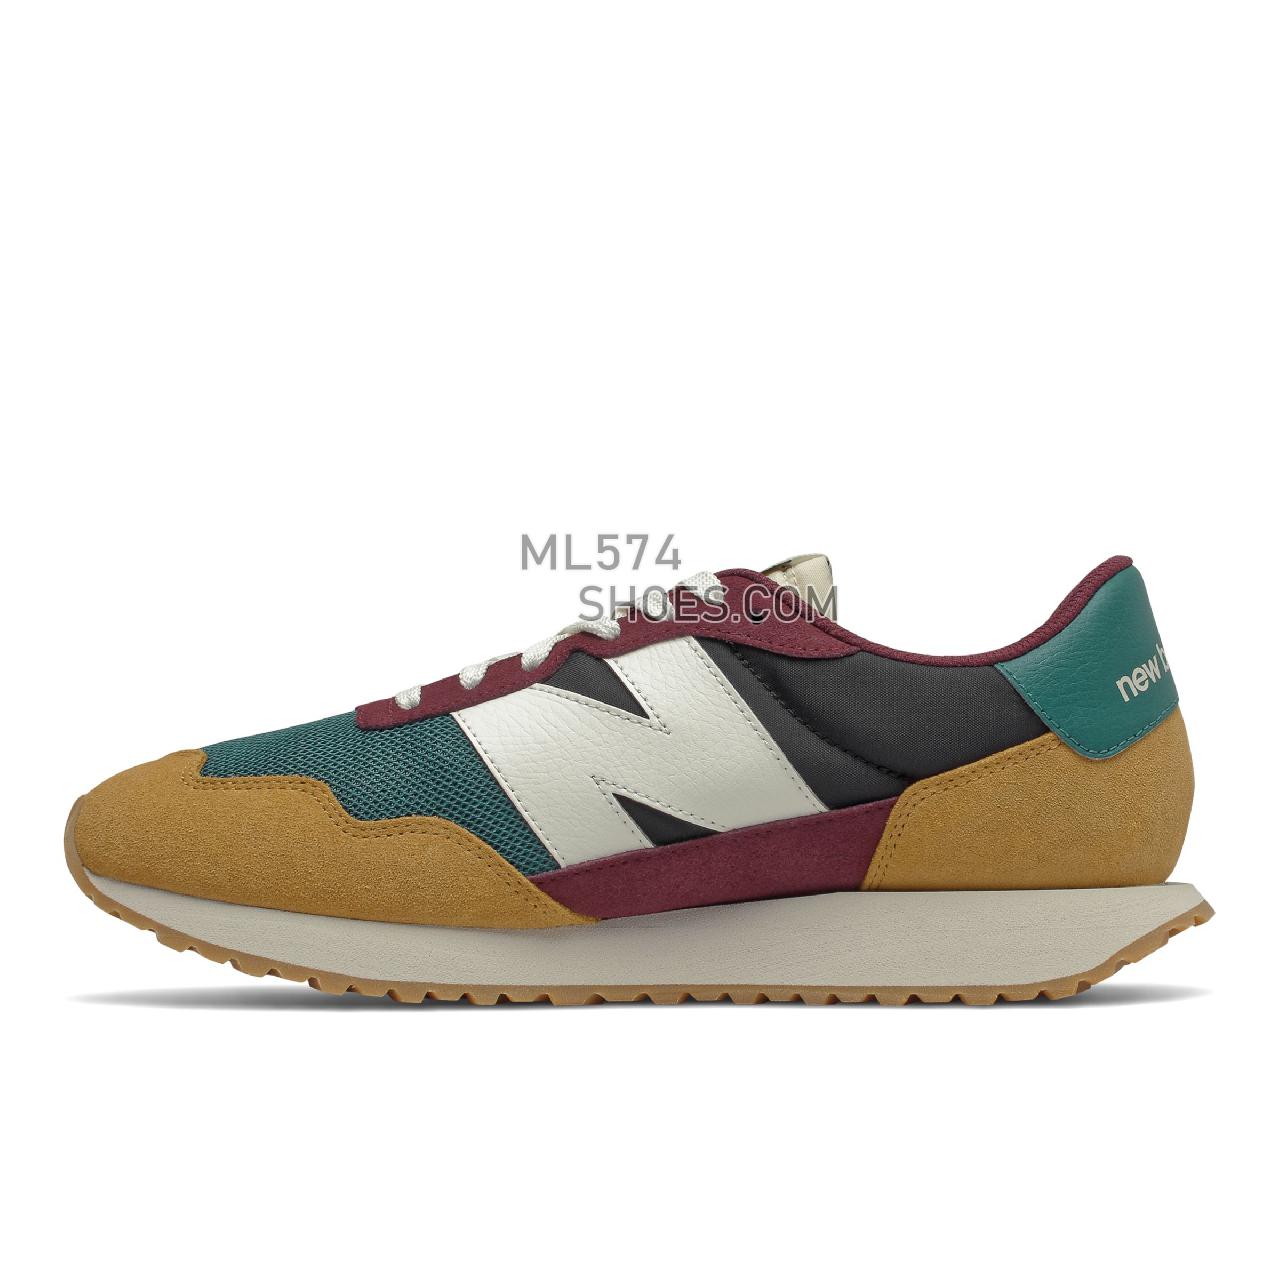 New Balance 237 - Men's Sport Style Sneakers - Workwear with Nb Burgundy - MS237HR1